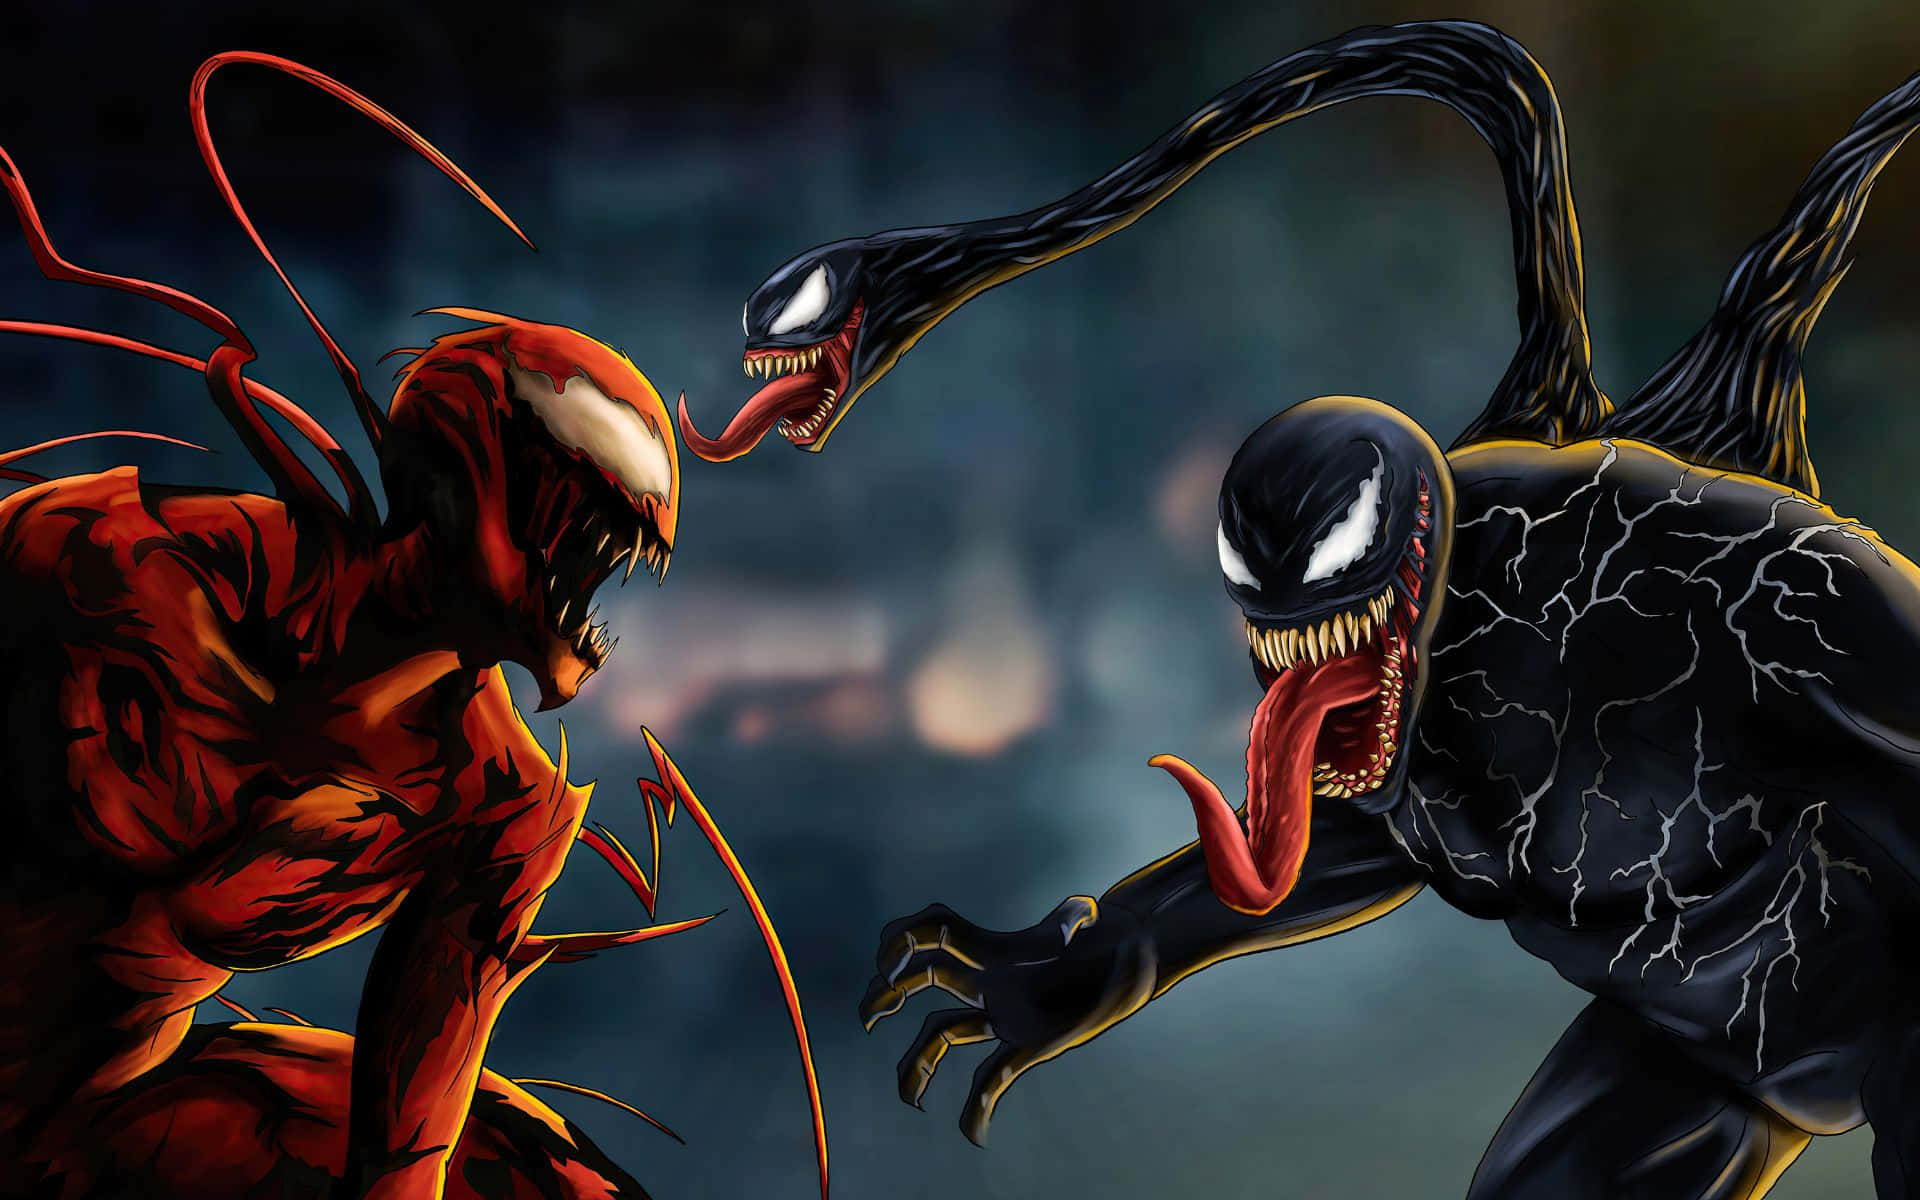 Carnage and Venom in a fierce face-off Wallpaper